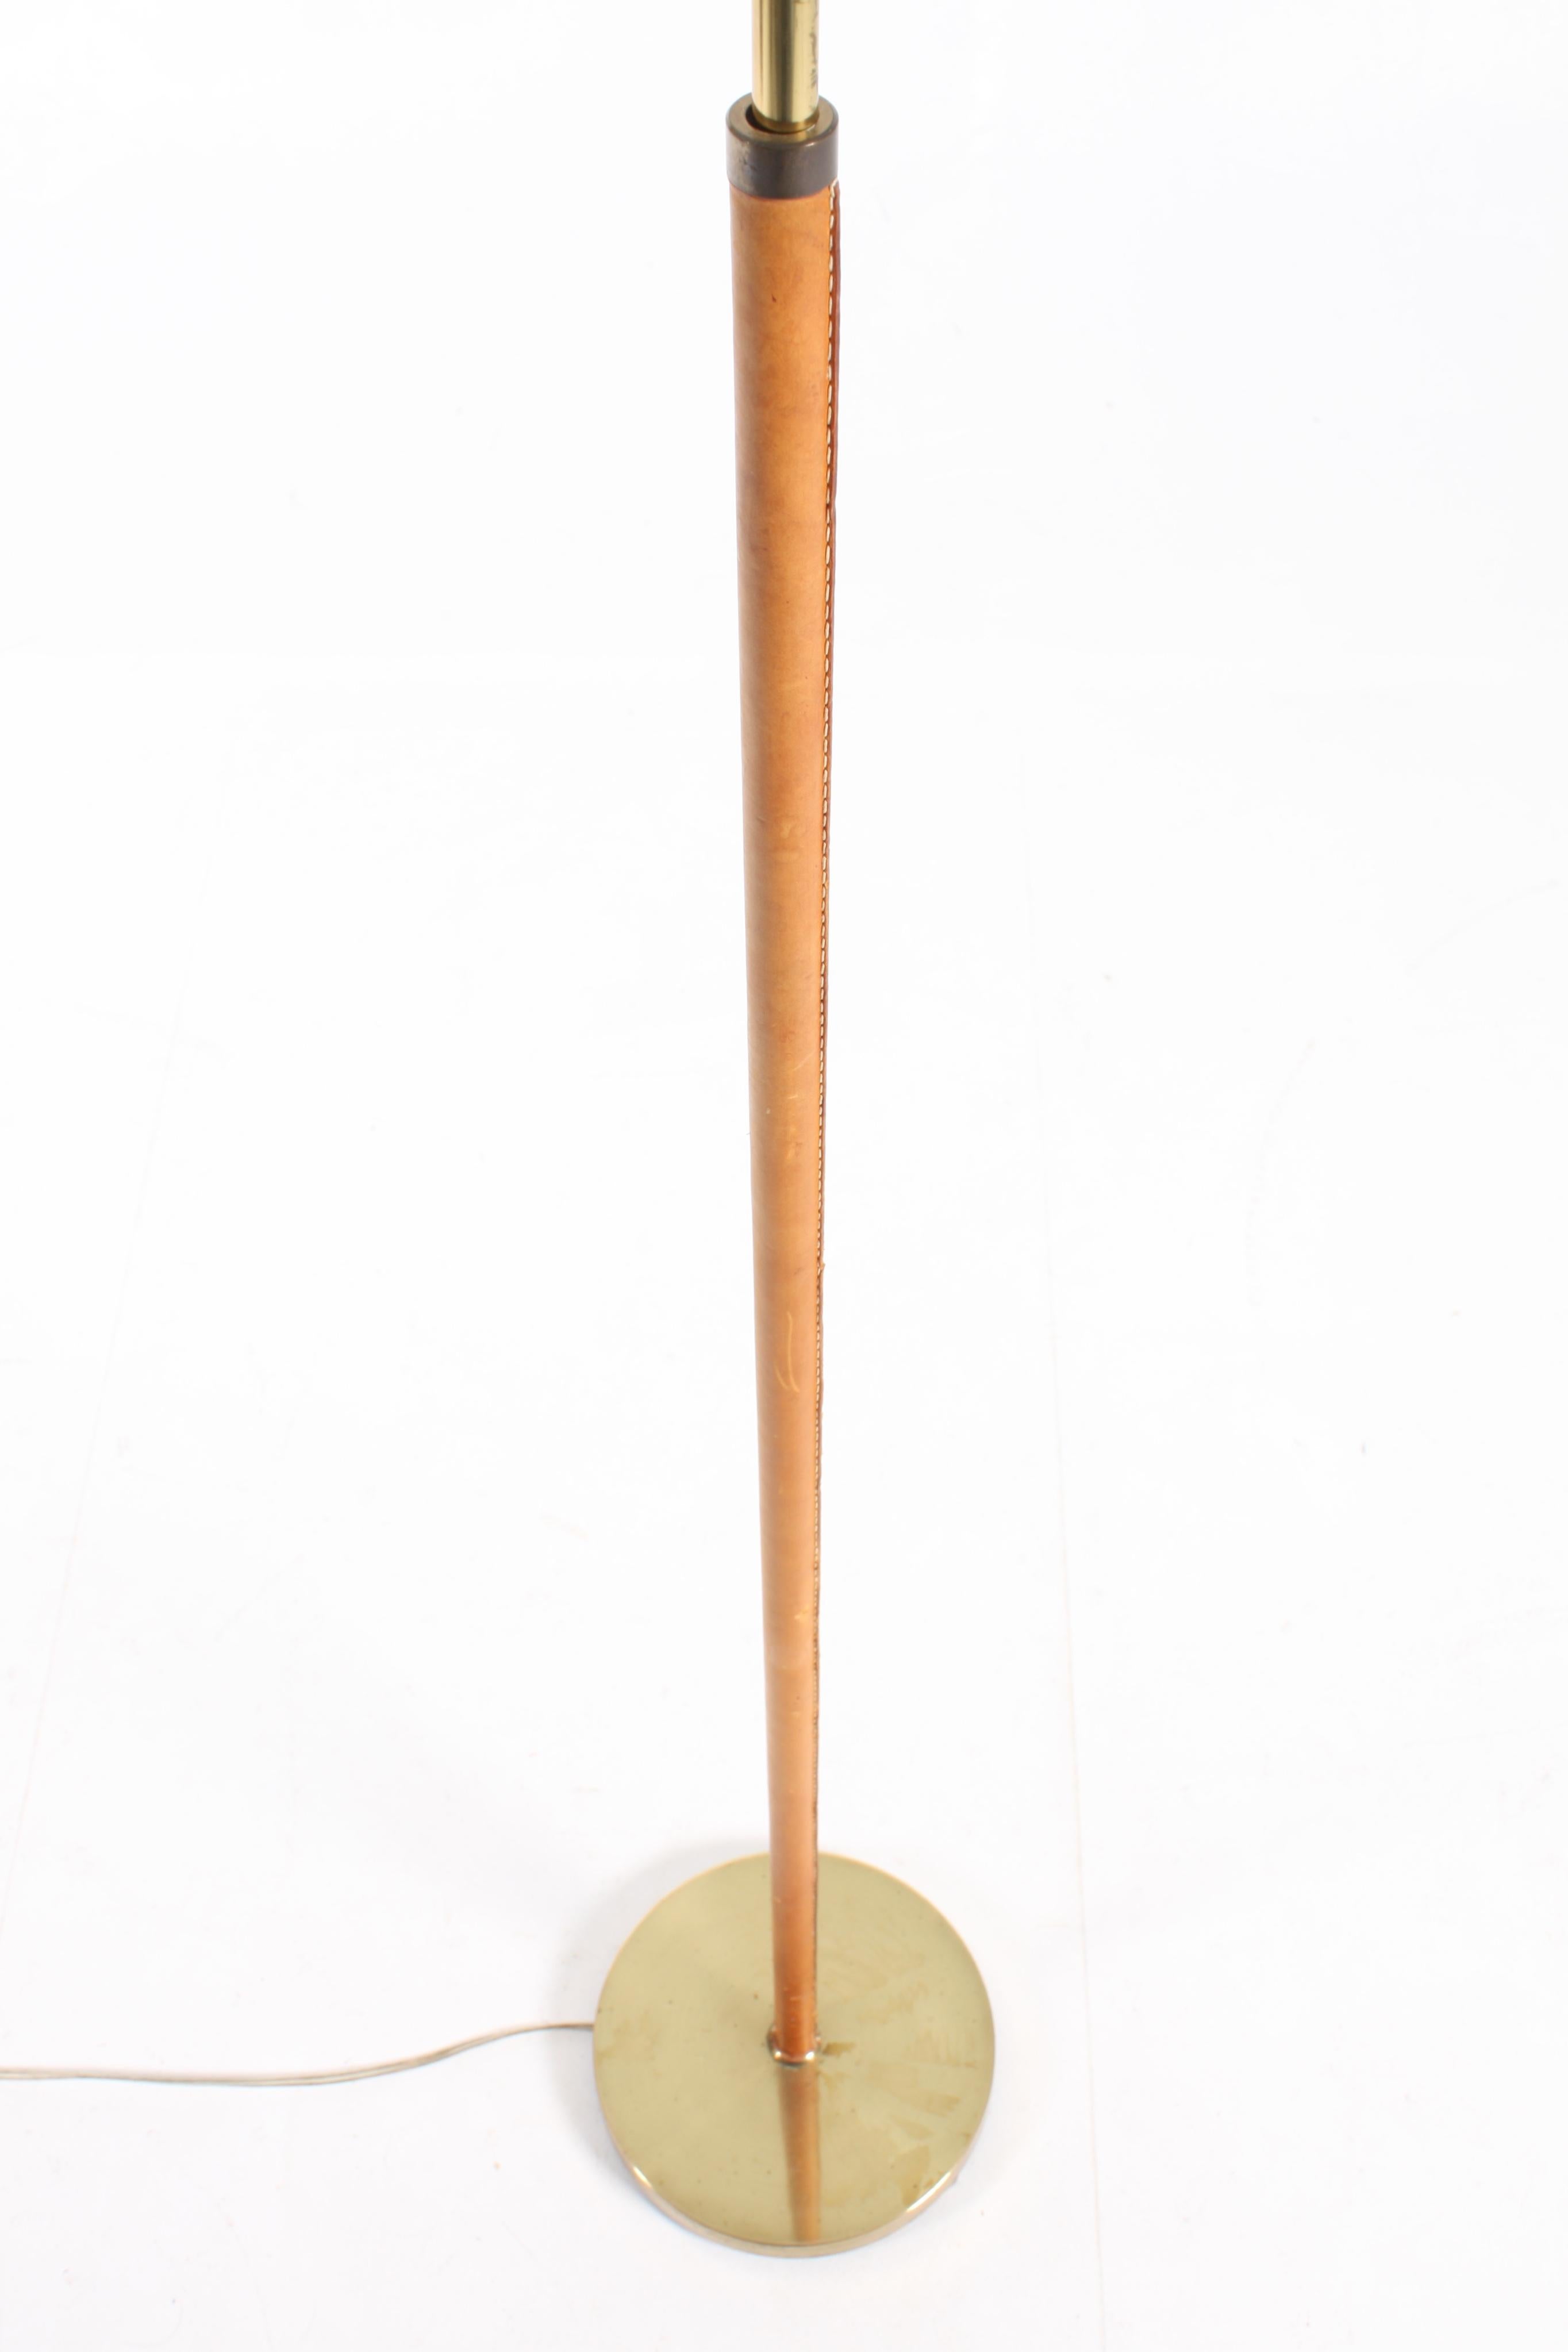 Floor Lamp in Brass and Leather im Zustand „Gut“ in Lejre, DK